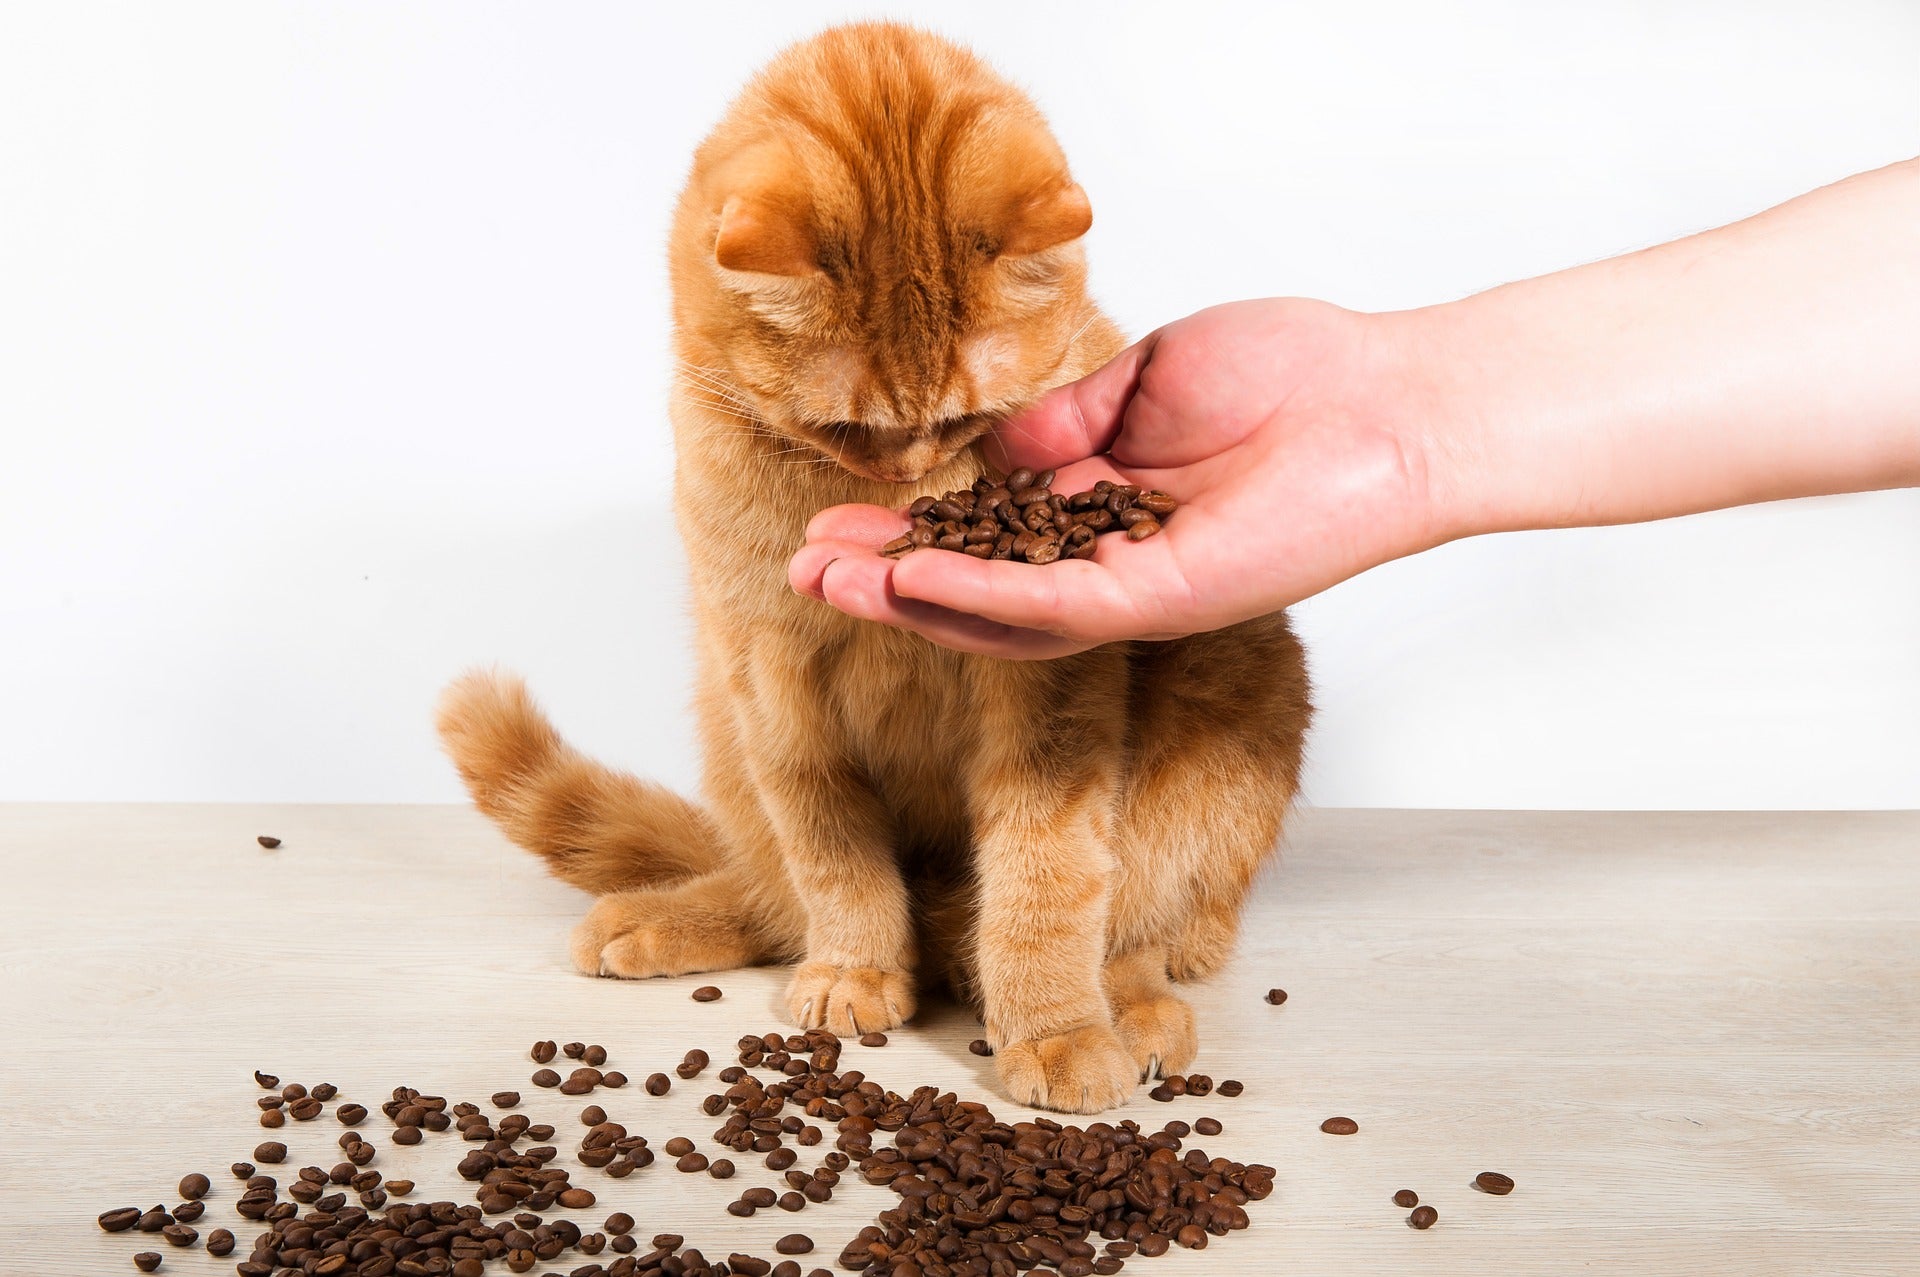 Top kitty no-no's: Your cat should not eat/drink coffee